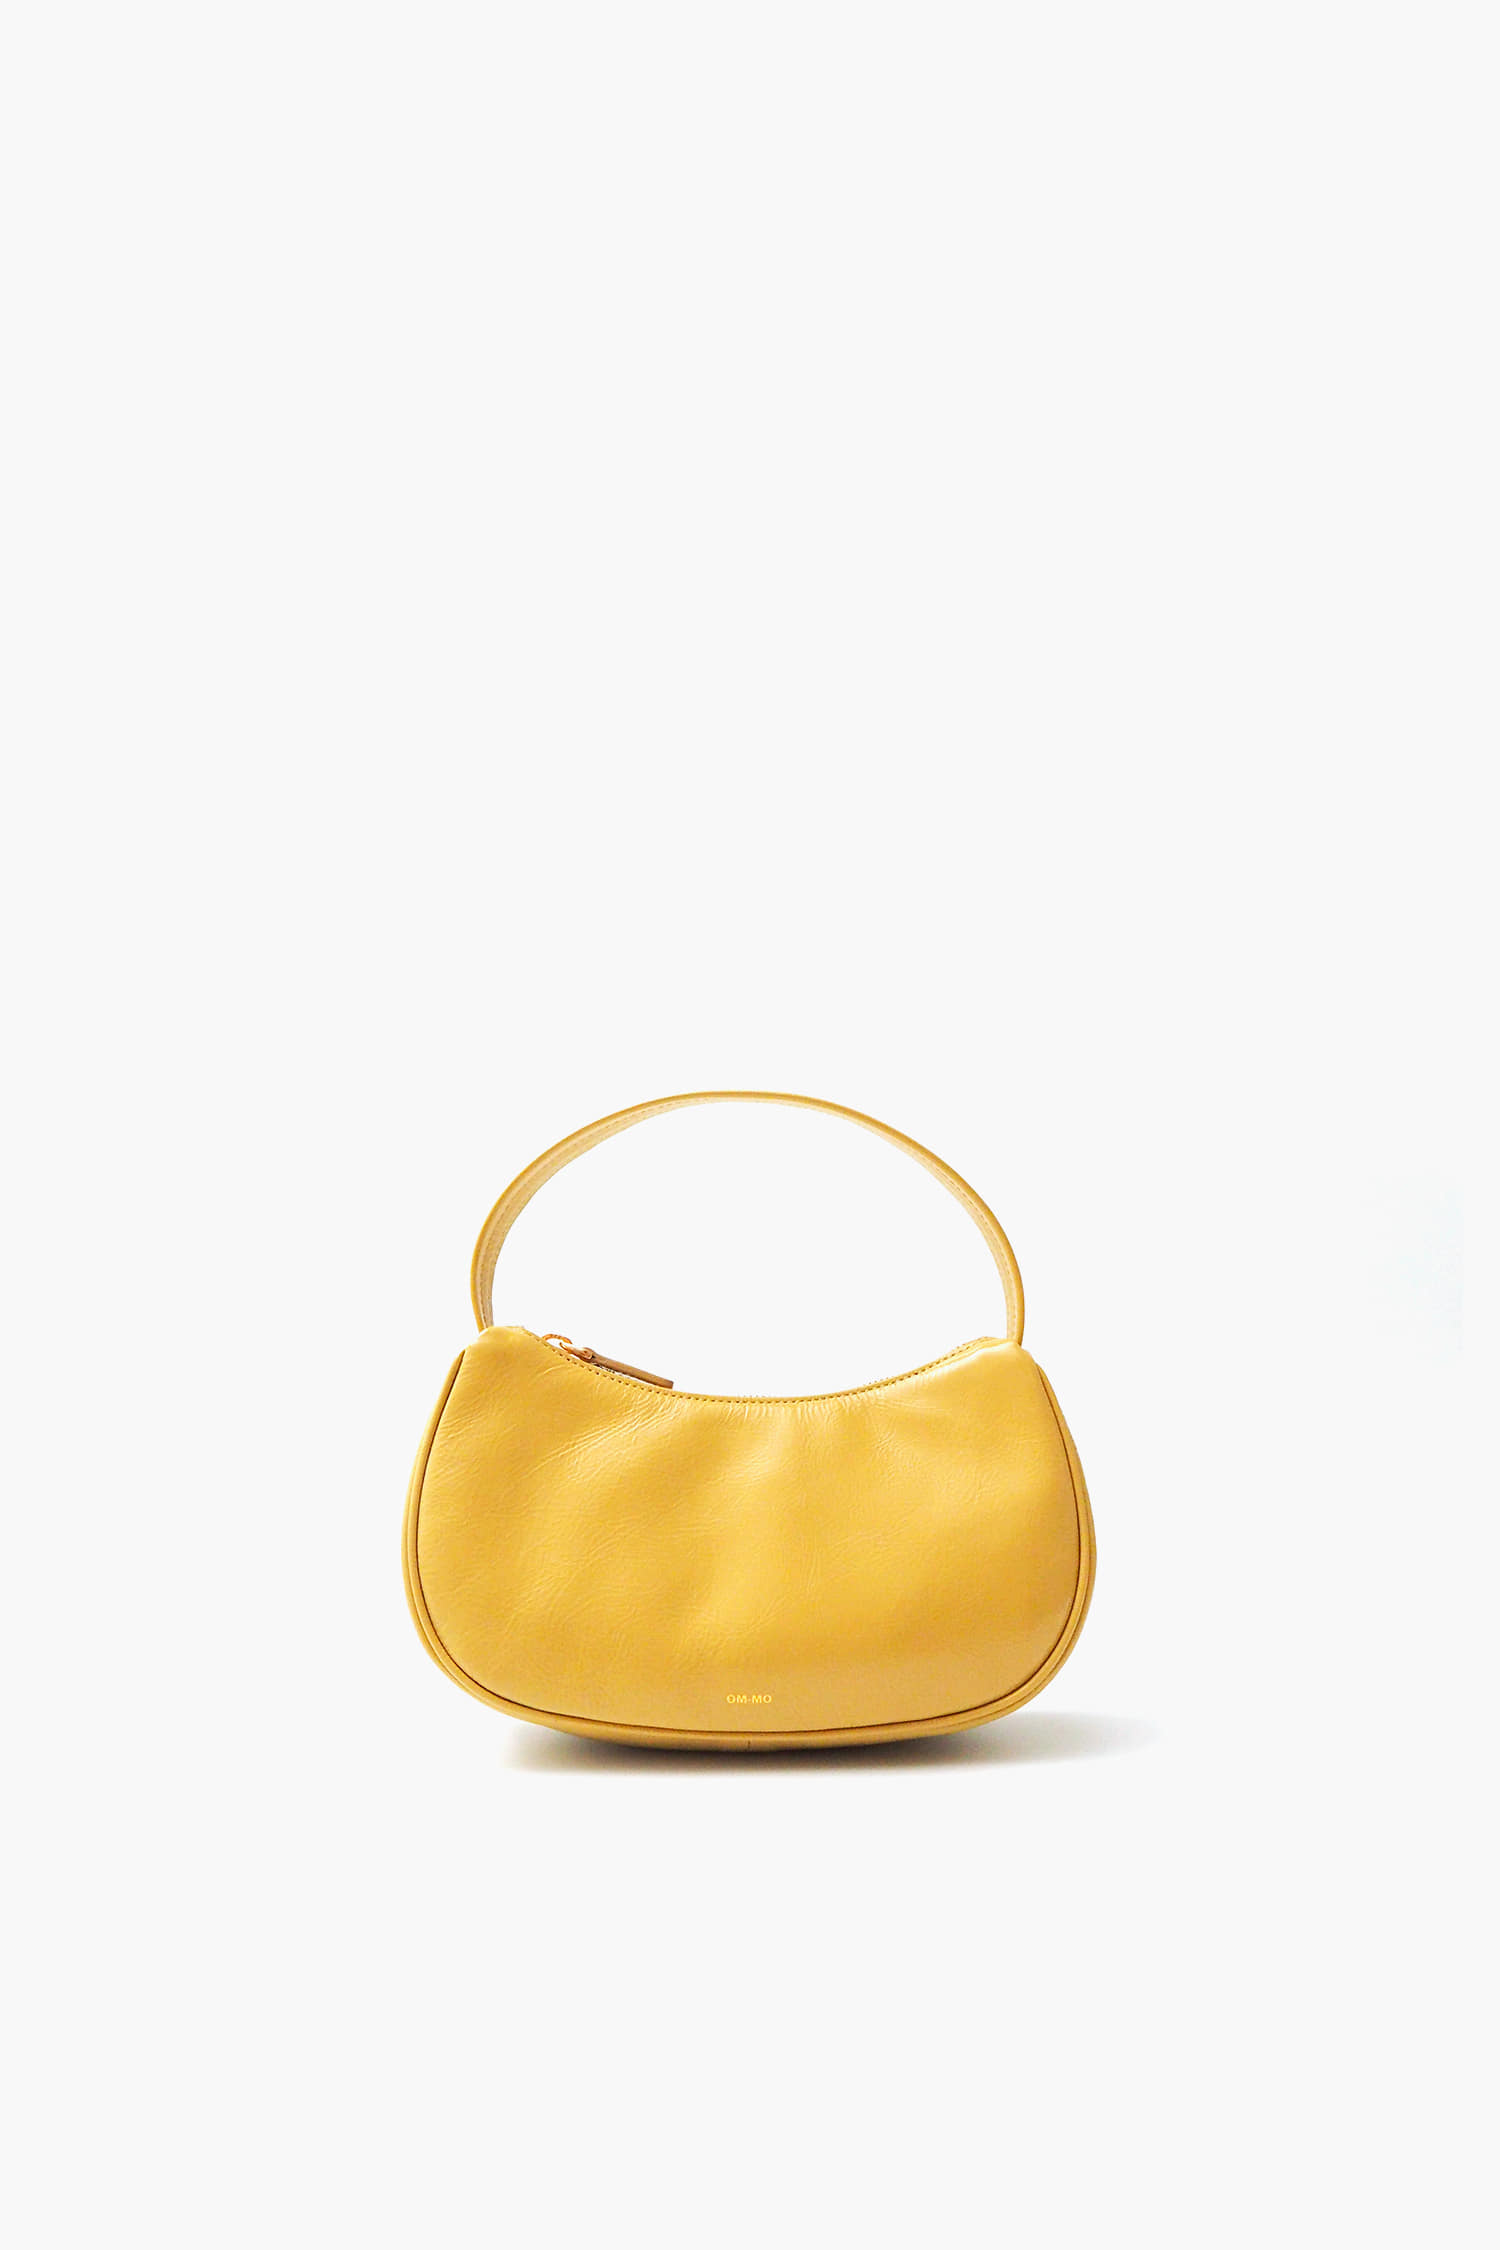 NUA BAG (BUTTER) - GOAT PATENT LEATHER